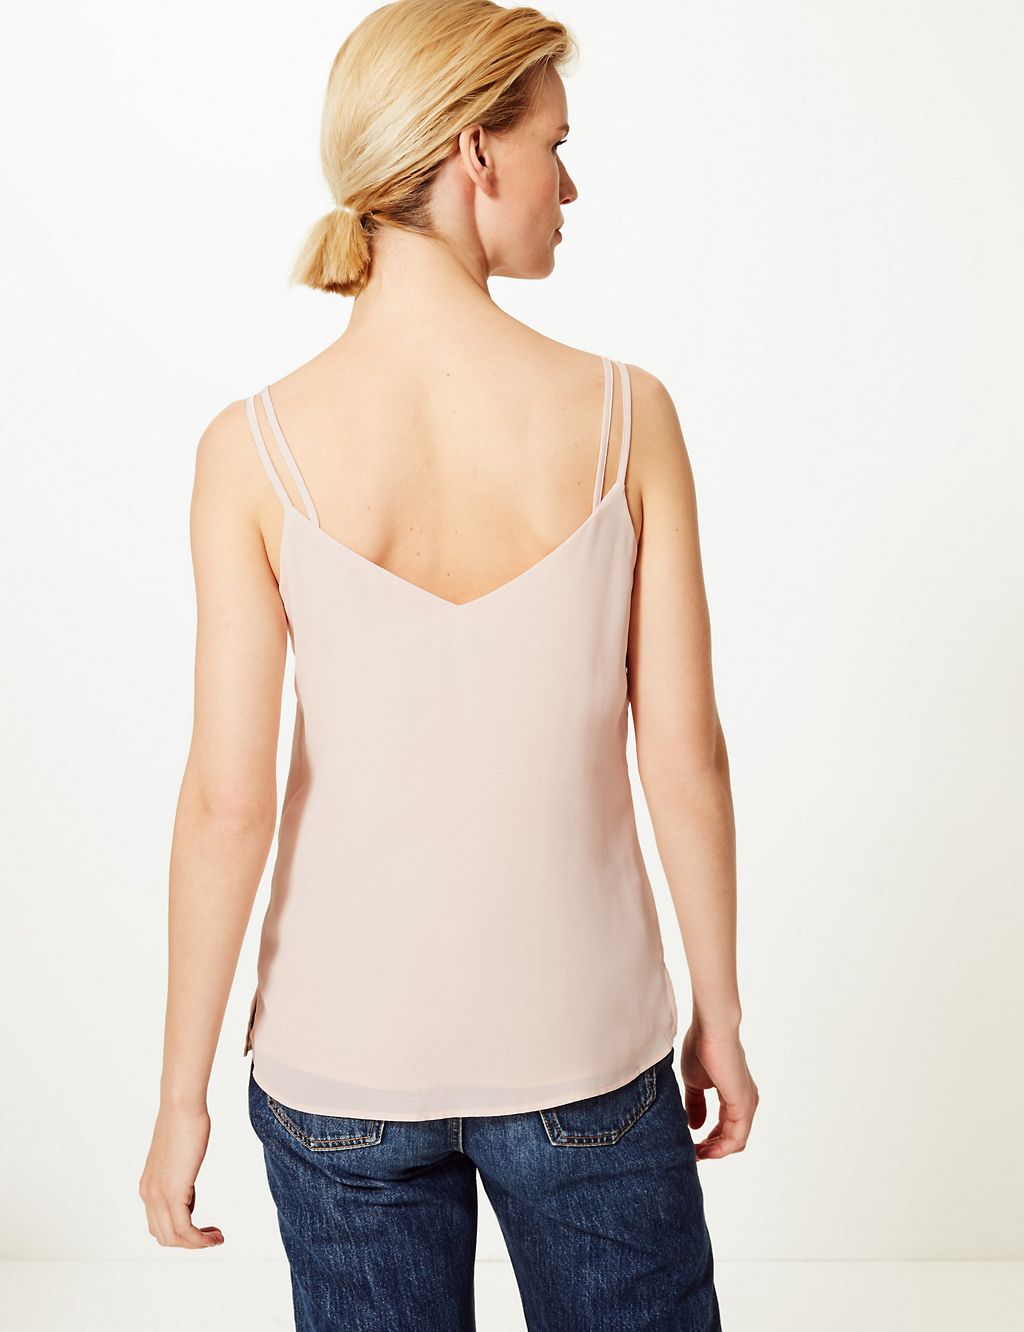 Camisole Top 4 of 4